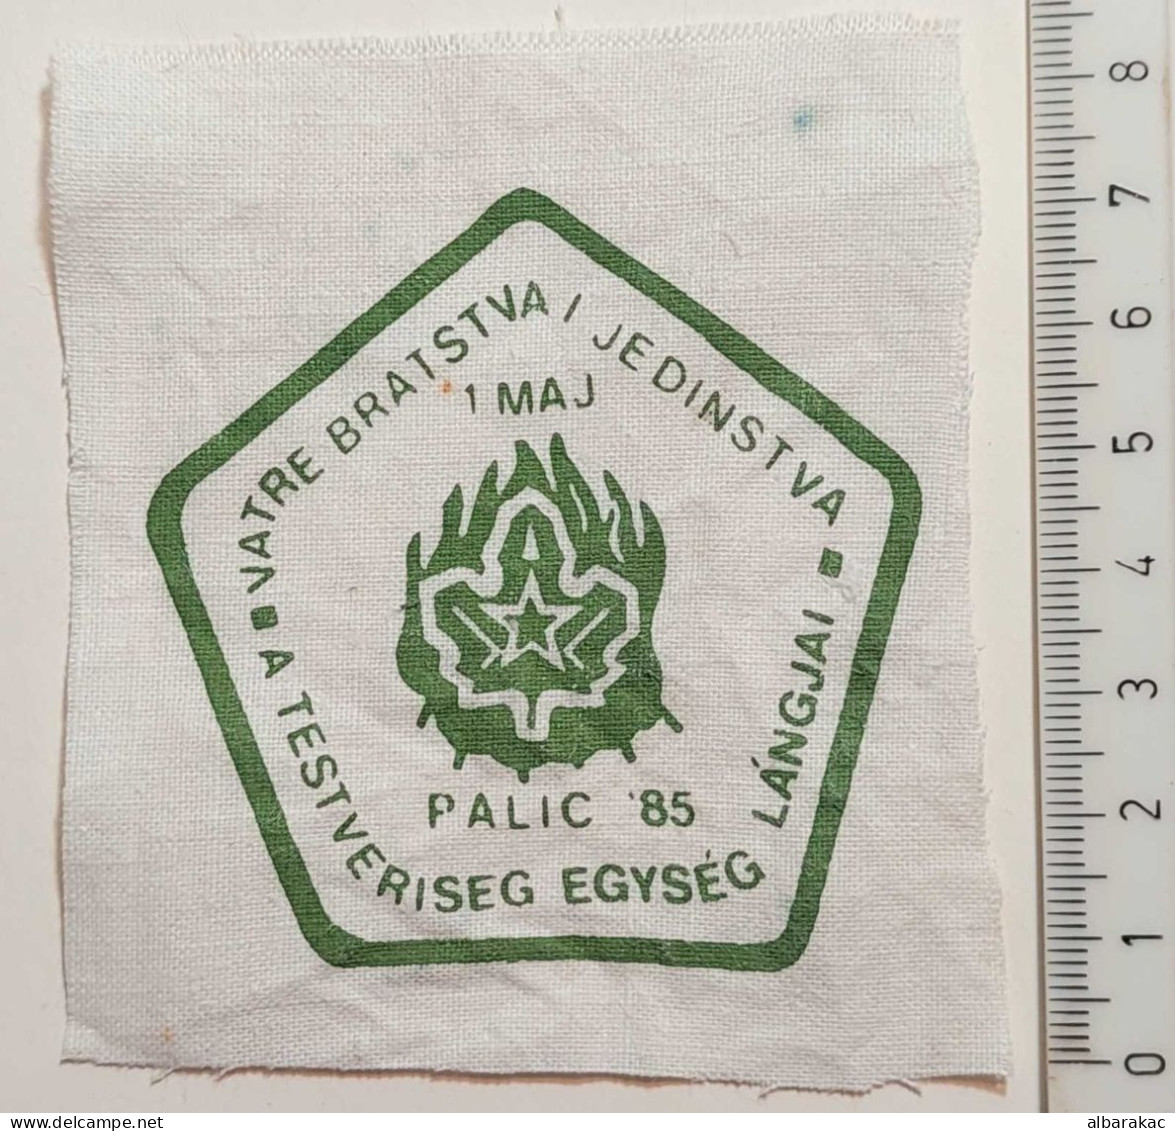 Serbia , Boy Scout Patches - The Fire Of Brotherhood And Unity - Palic 1985 1. Maj - Padvinderij